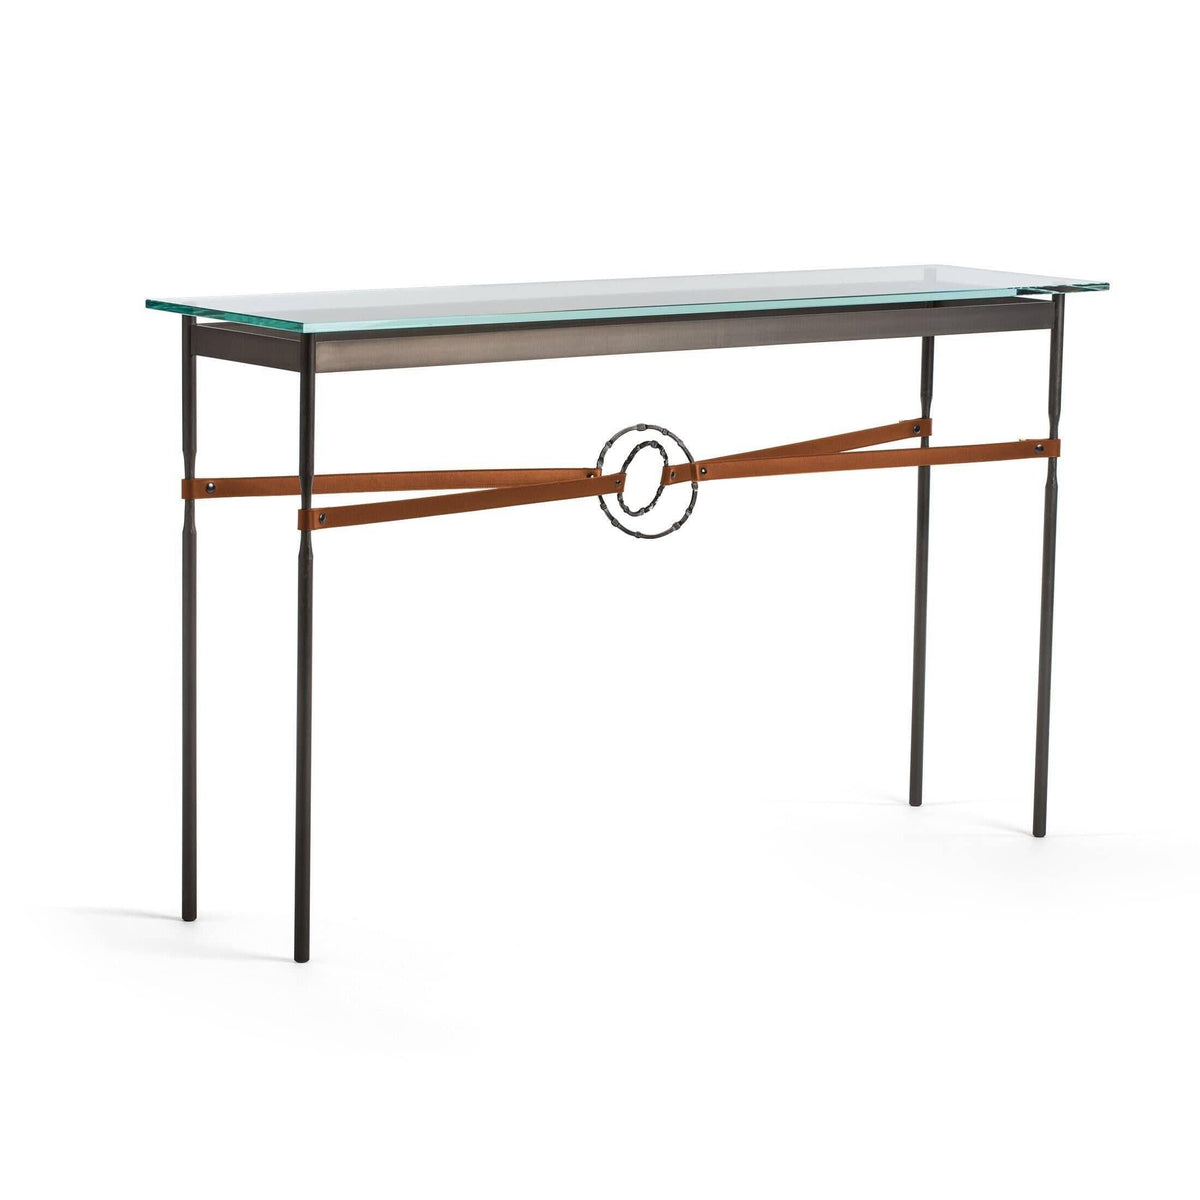 Hubbardton Forge - Equus Chestnut Leather Console Table - 750118-07-07-LC-VA0714 | Montreal Lighting & Hardware